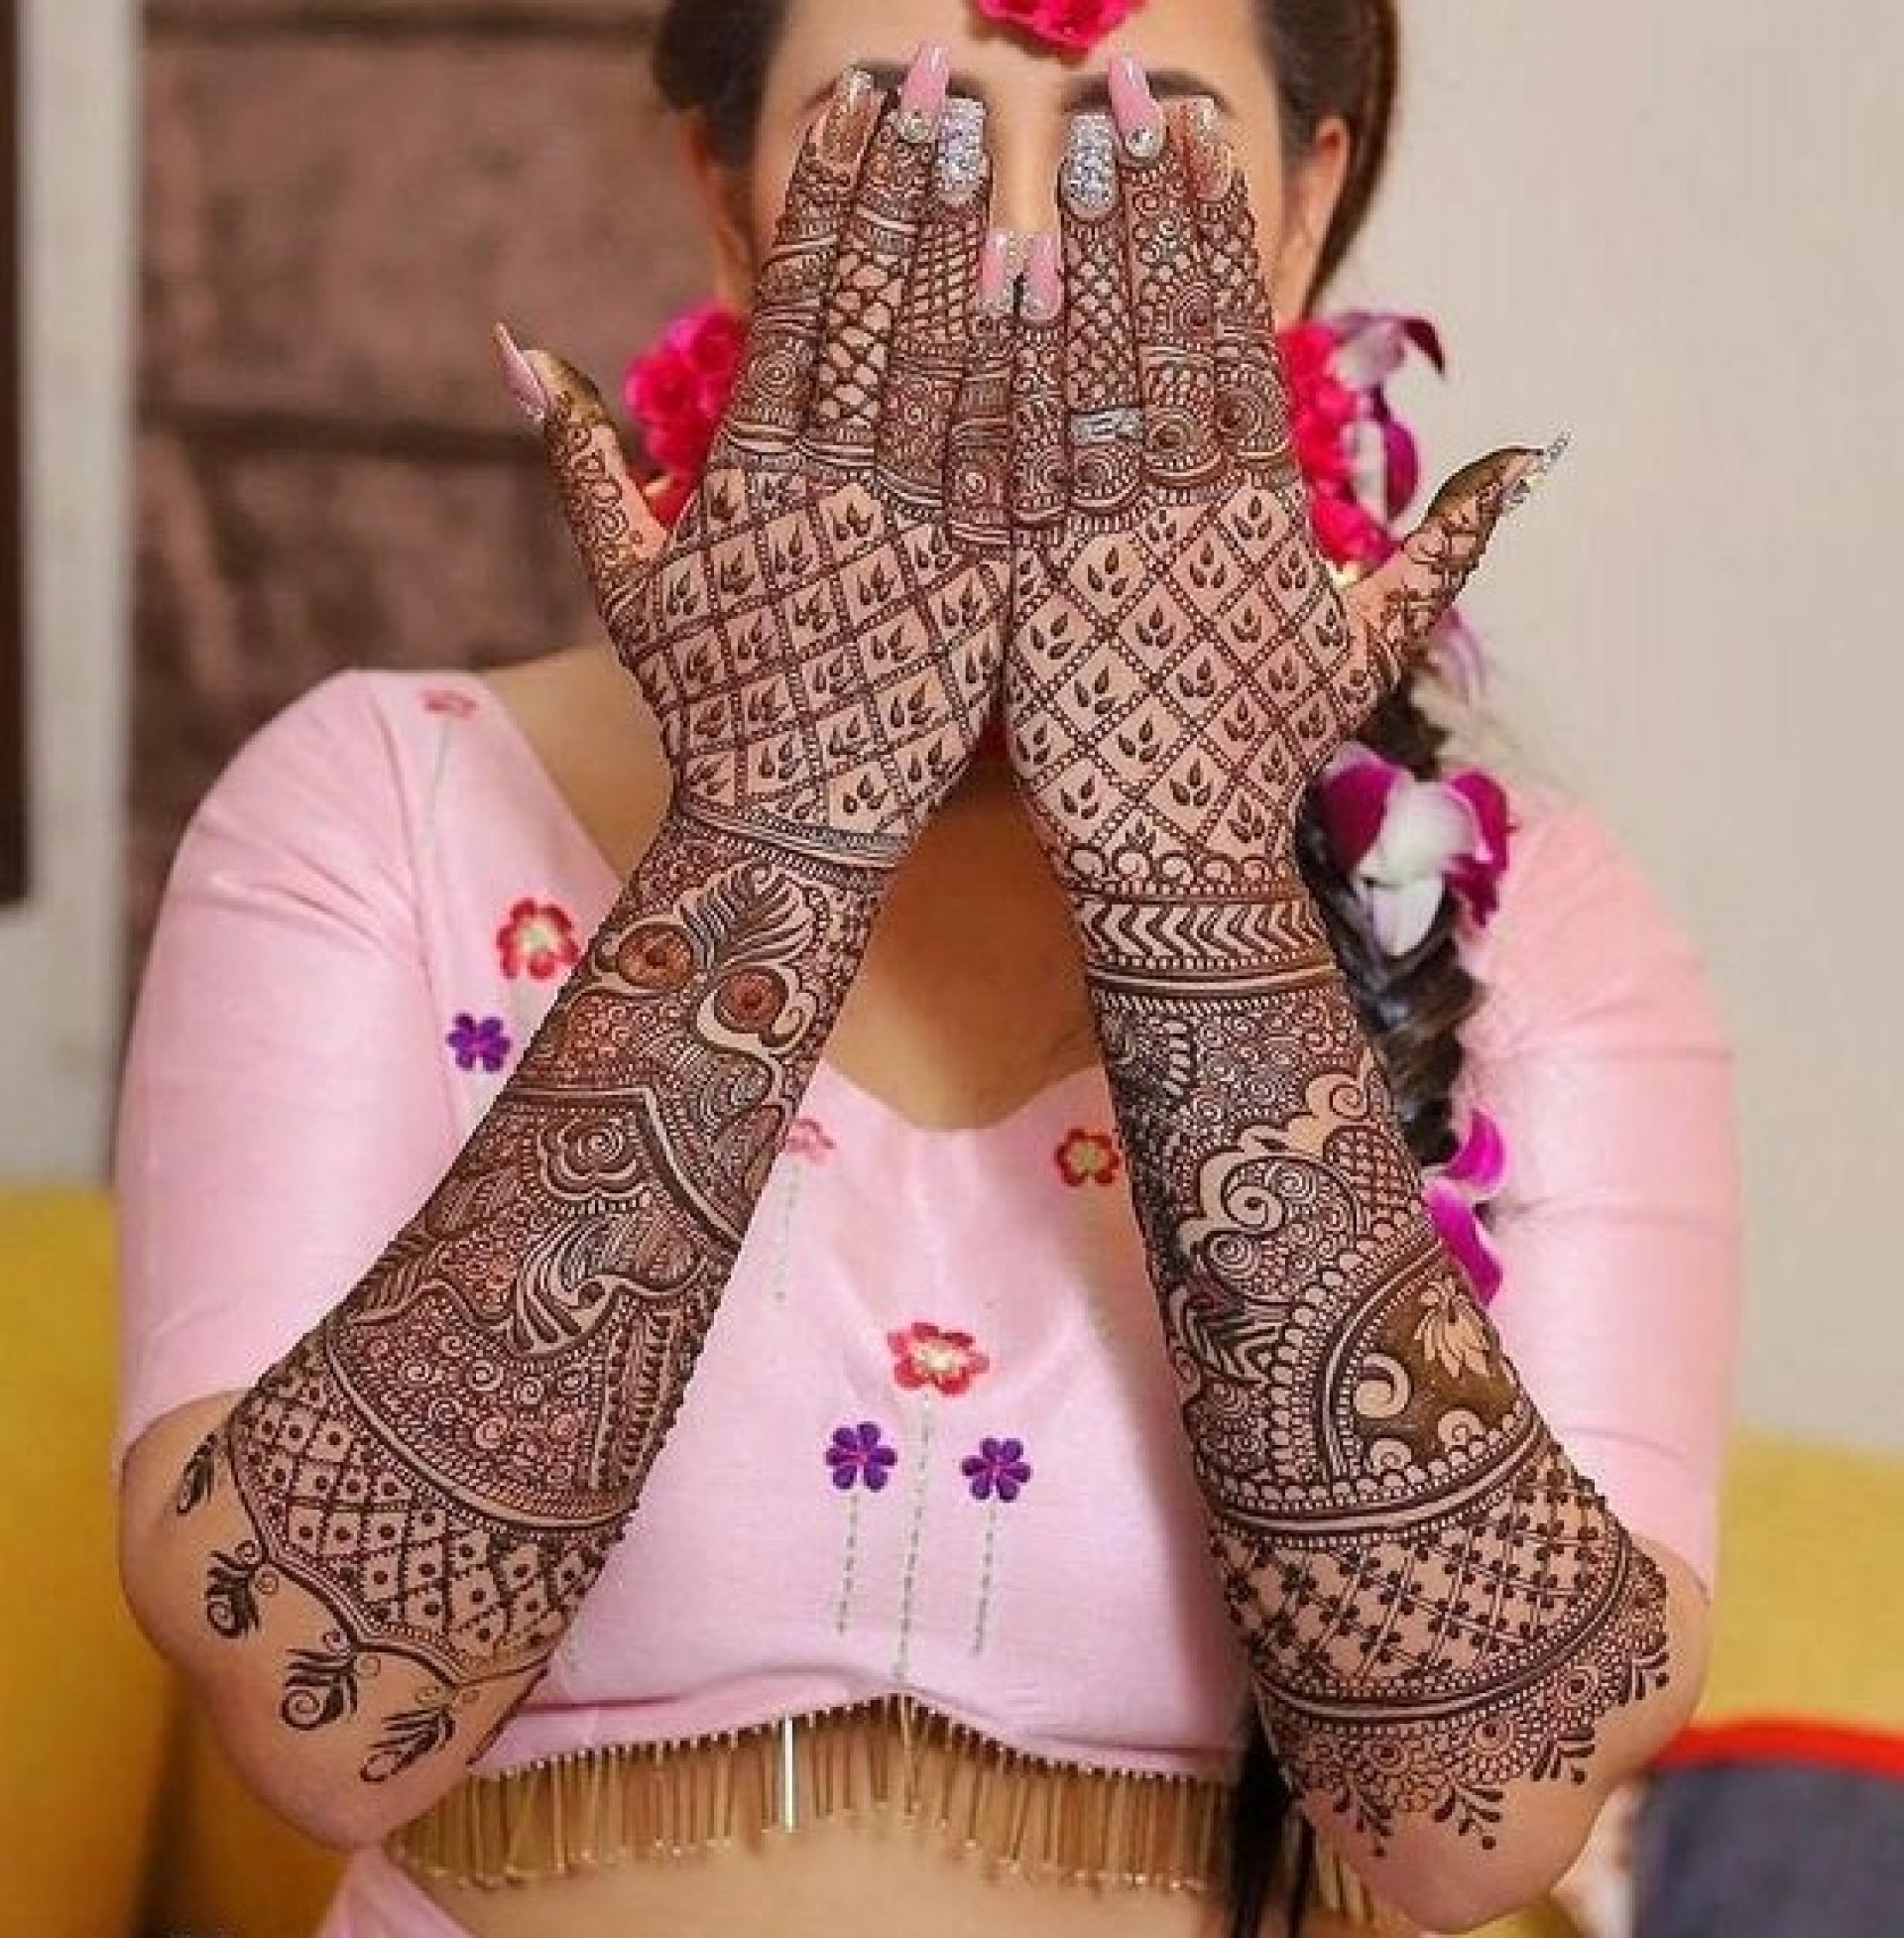 Breathtaking Full Hand Mehndi Designs For Traditional Indian Brides-sonthuy.vn